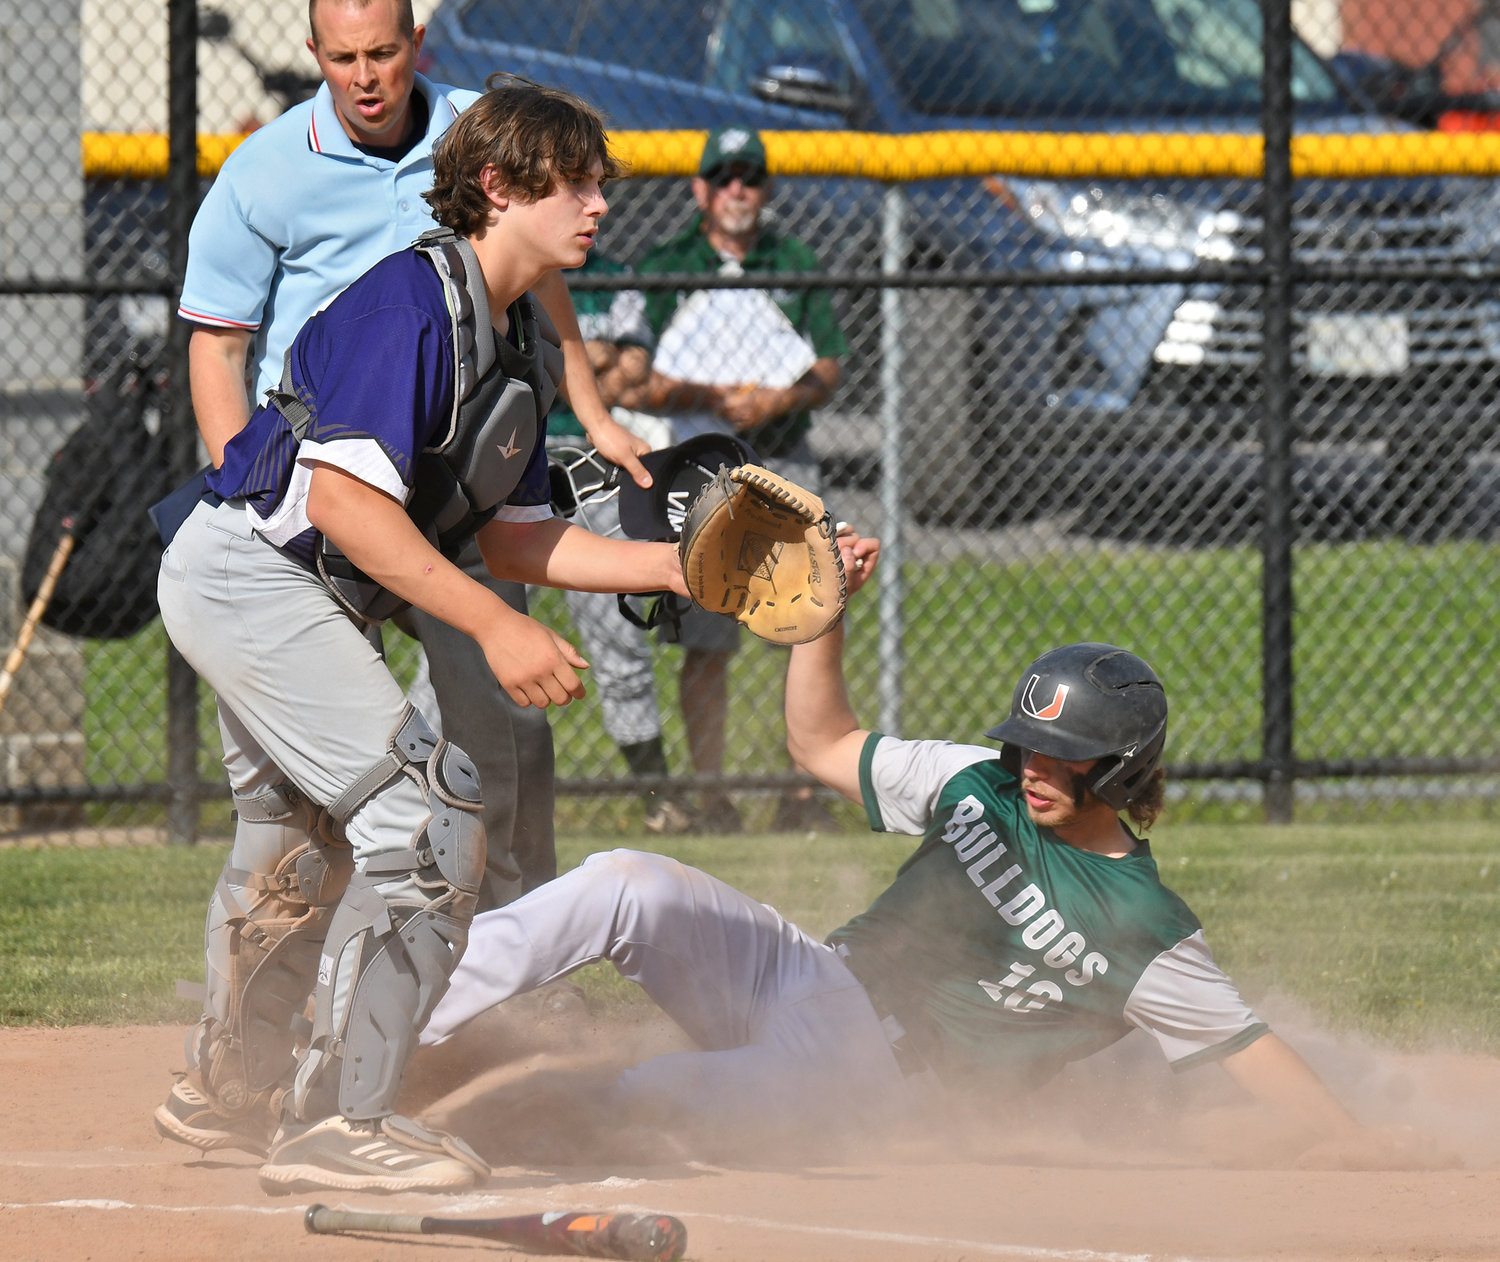 Westmoreland baserunner Michael Scalise slides safely into home at home Tuesday against Alexandria in the second round of the Section III Class C baseball playoffs. The top-seeded Bulldogs won 18-1 in a game called after five innings due to the mercy rule. Westmoreland is now 17-0 this season.